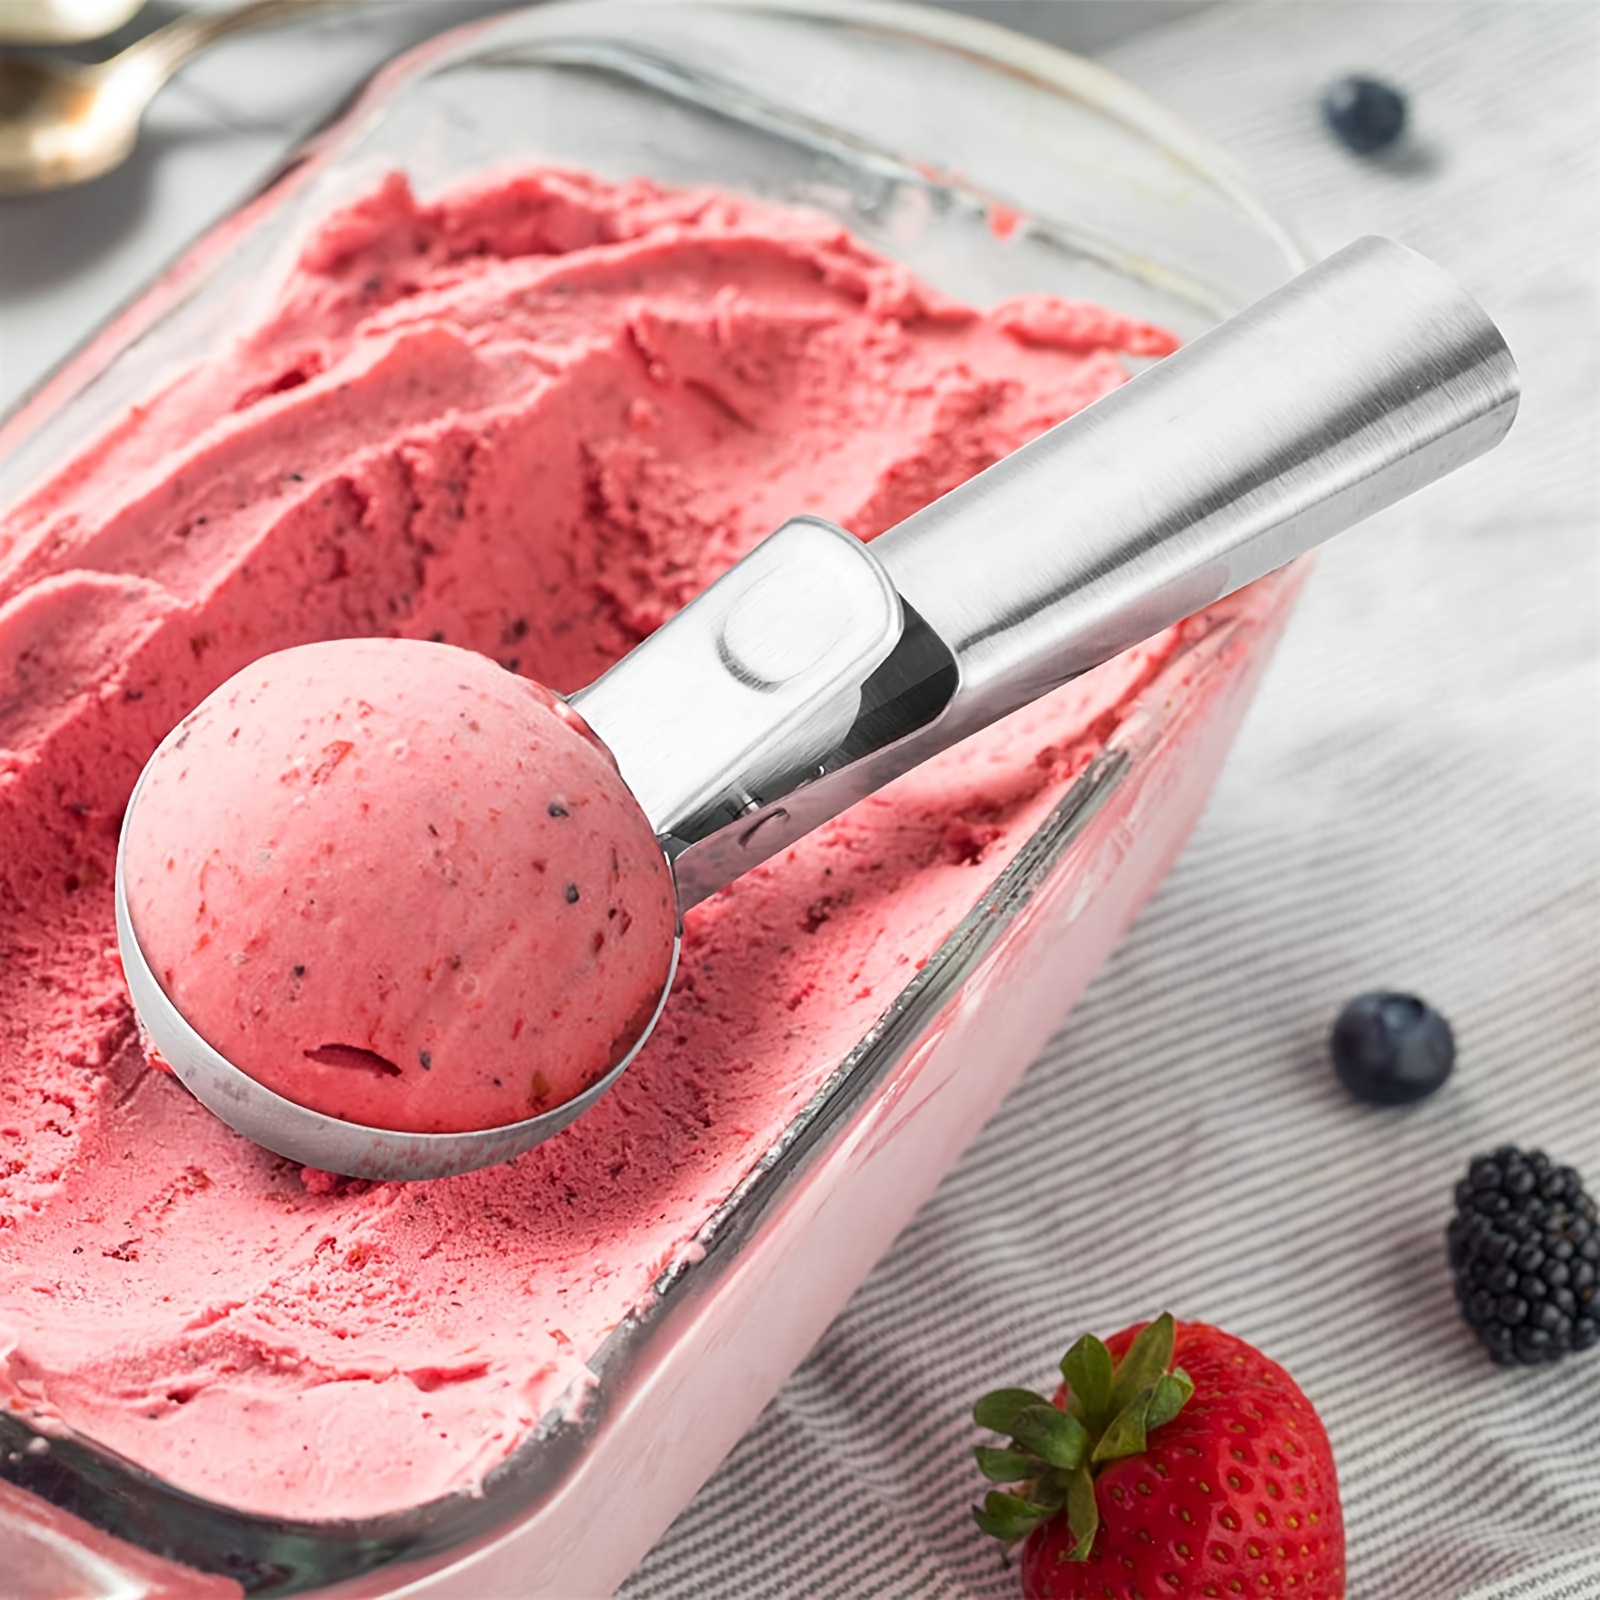 Heavy Duty Stainless Steel Ice Cream Scoop - Trigger-Activated For Easy  Serving!